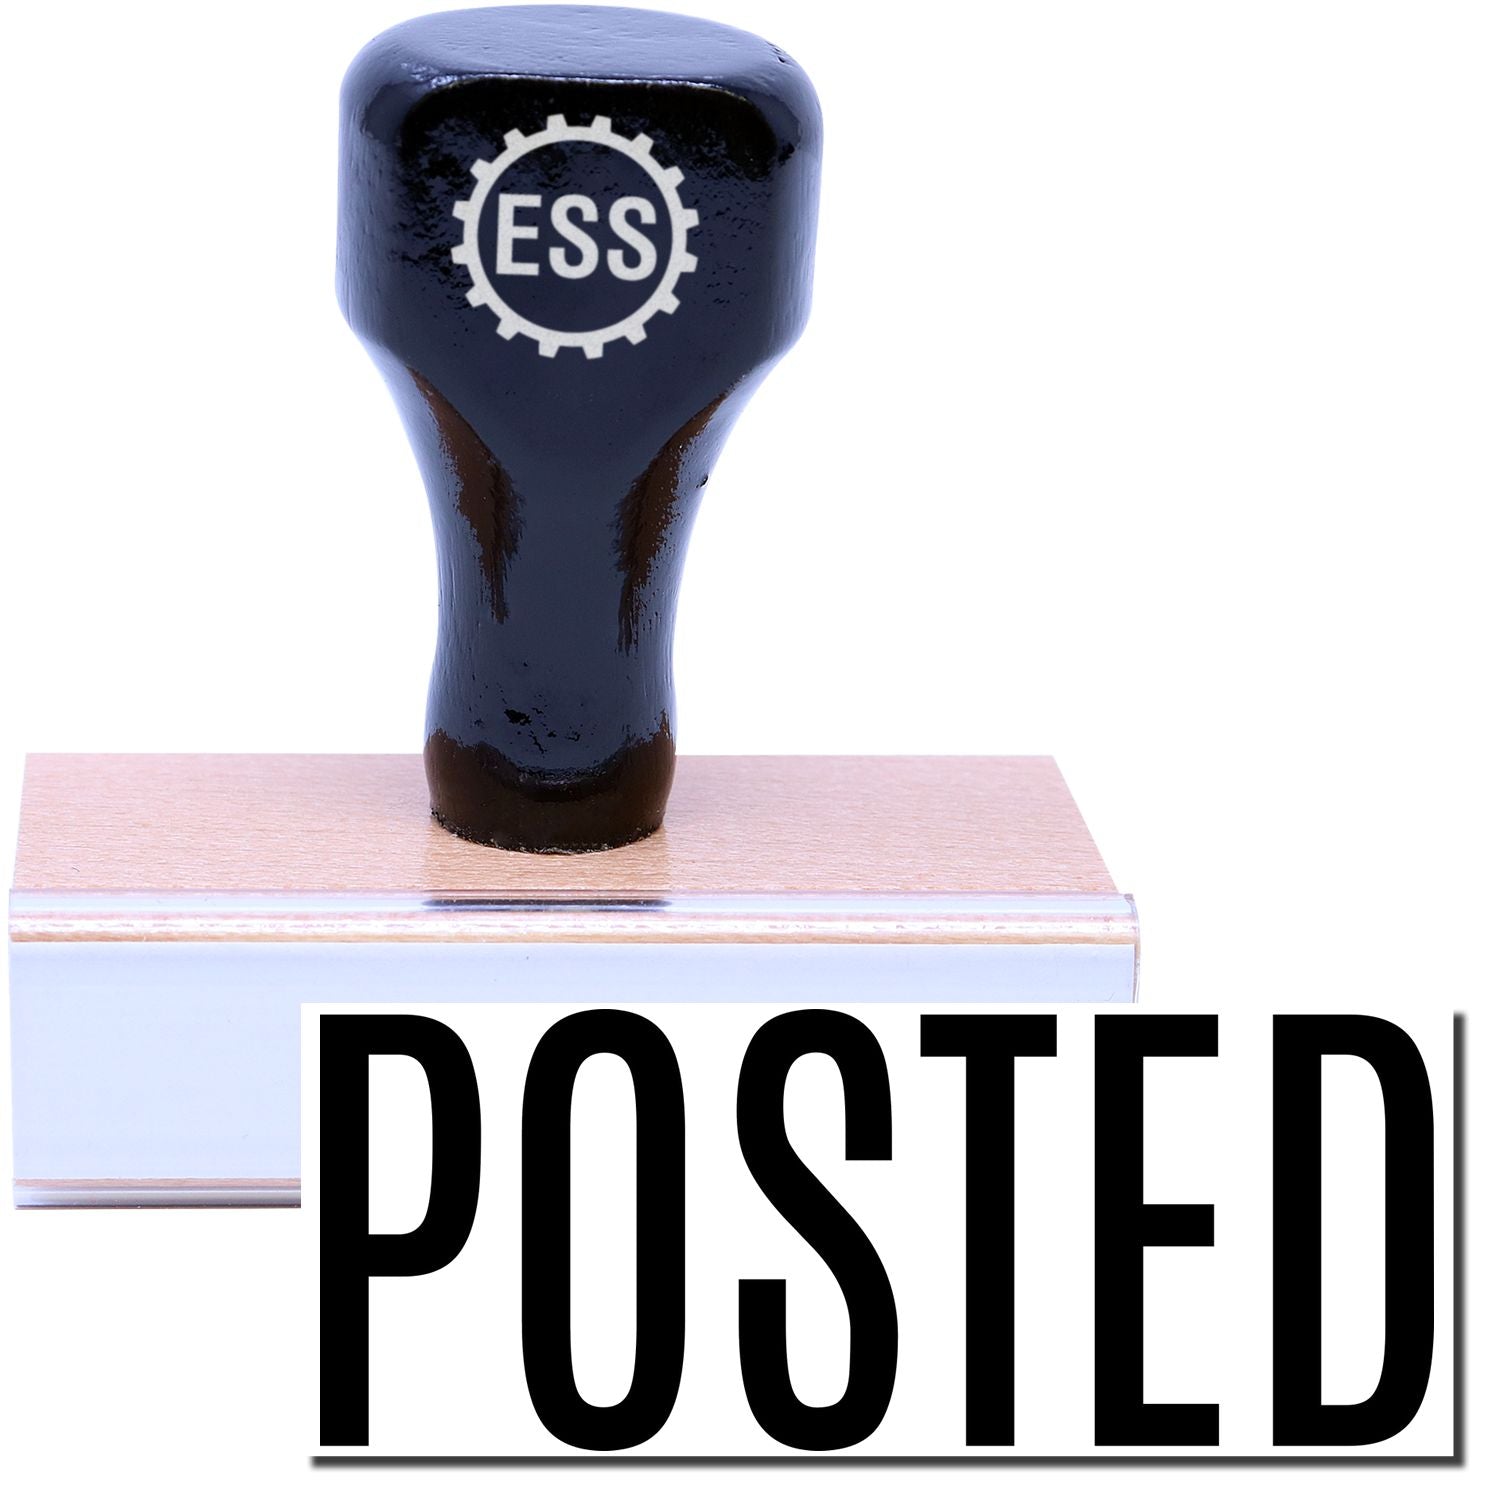 A stock office rubber stamp with a stamped image showing how the text "POSTED" in a narrow font is displayed after stamping.